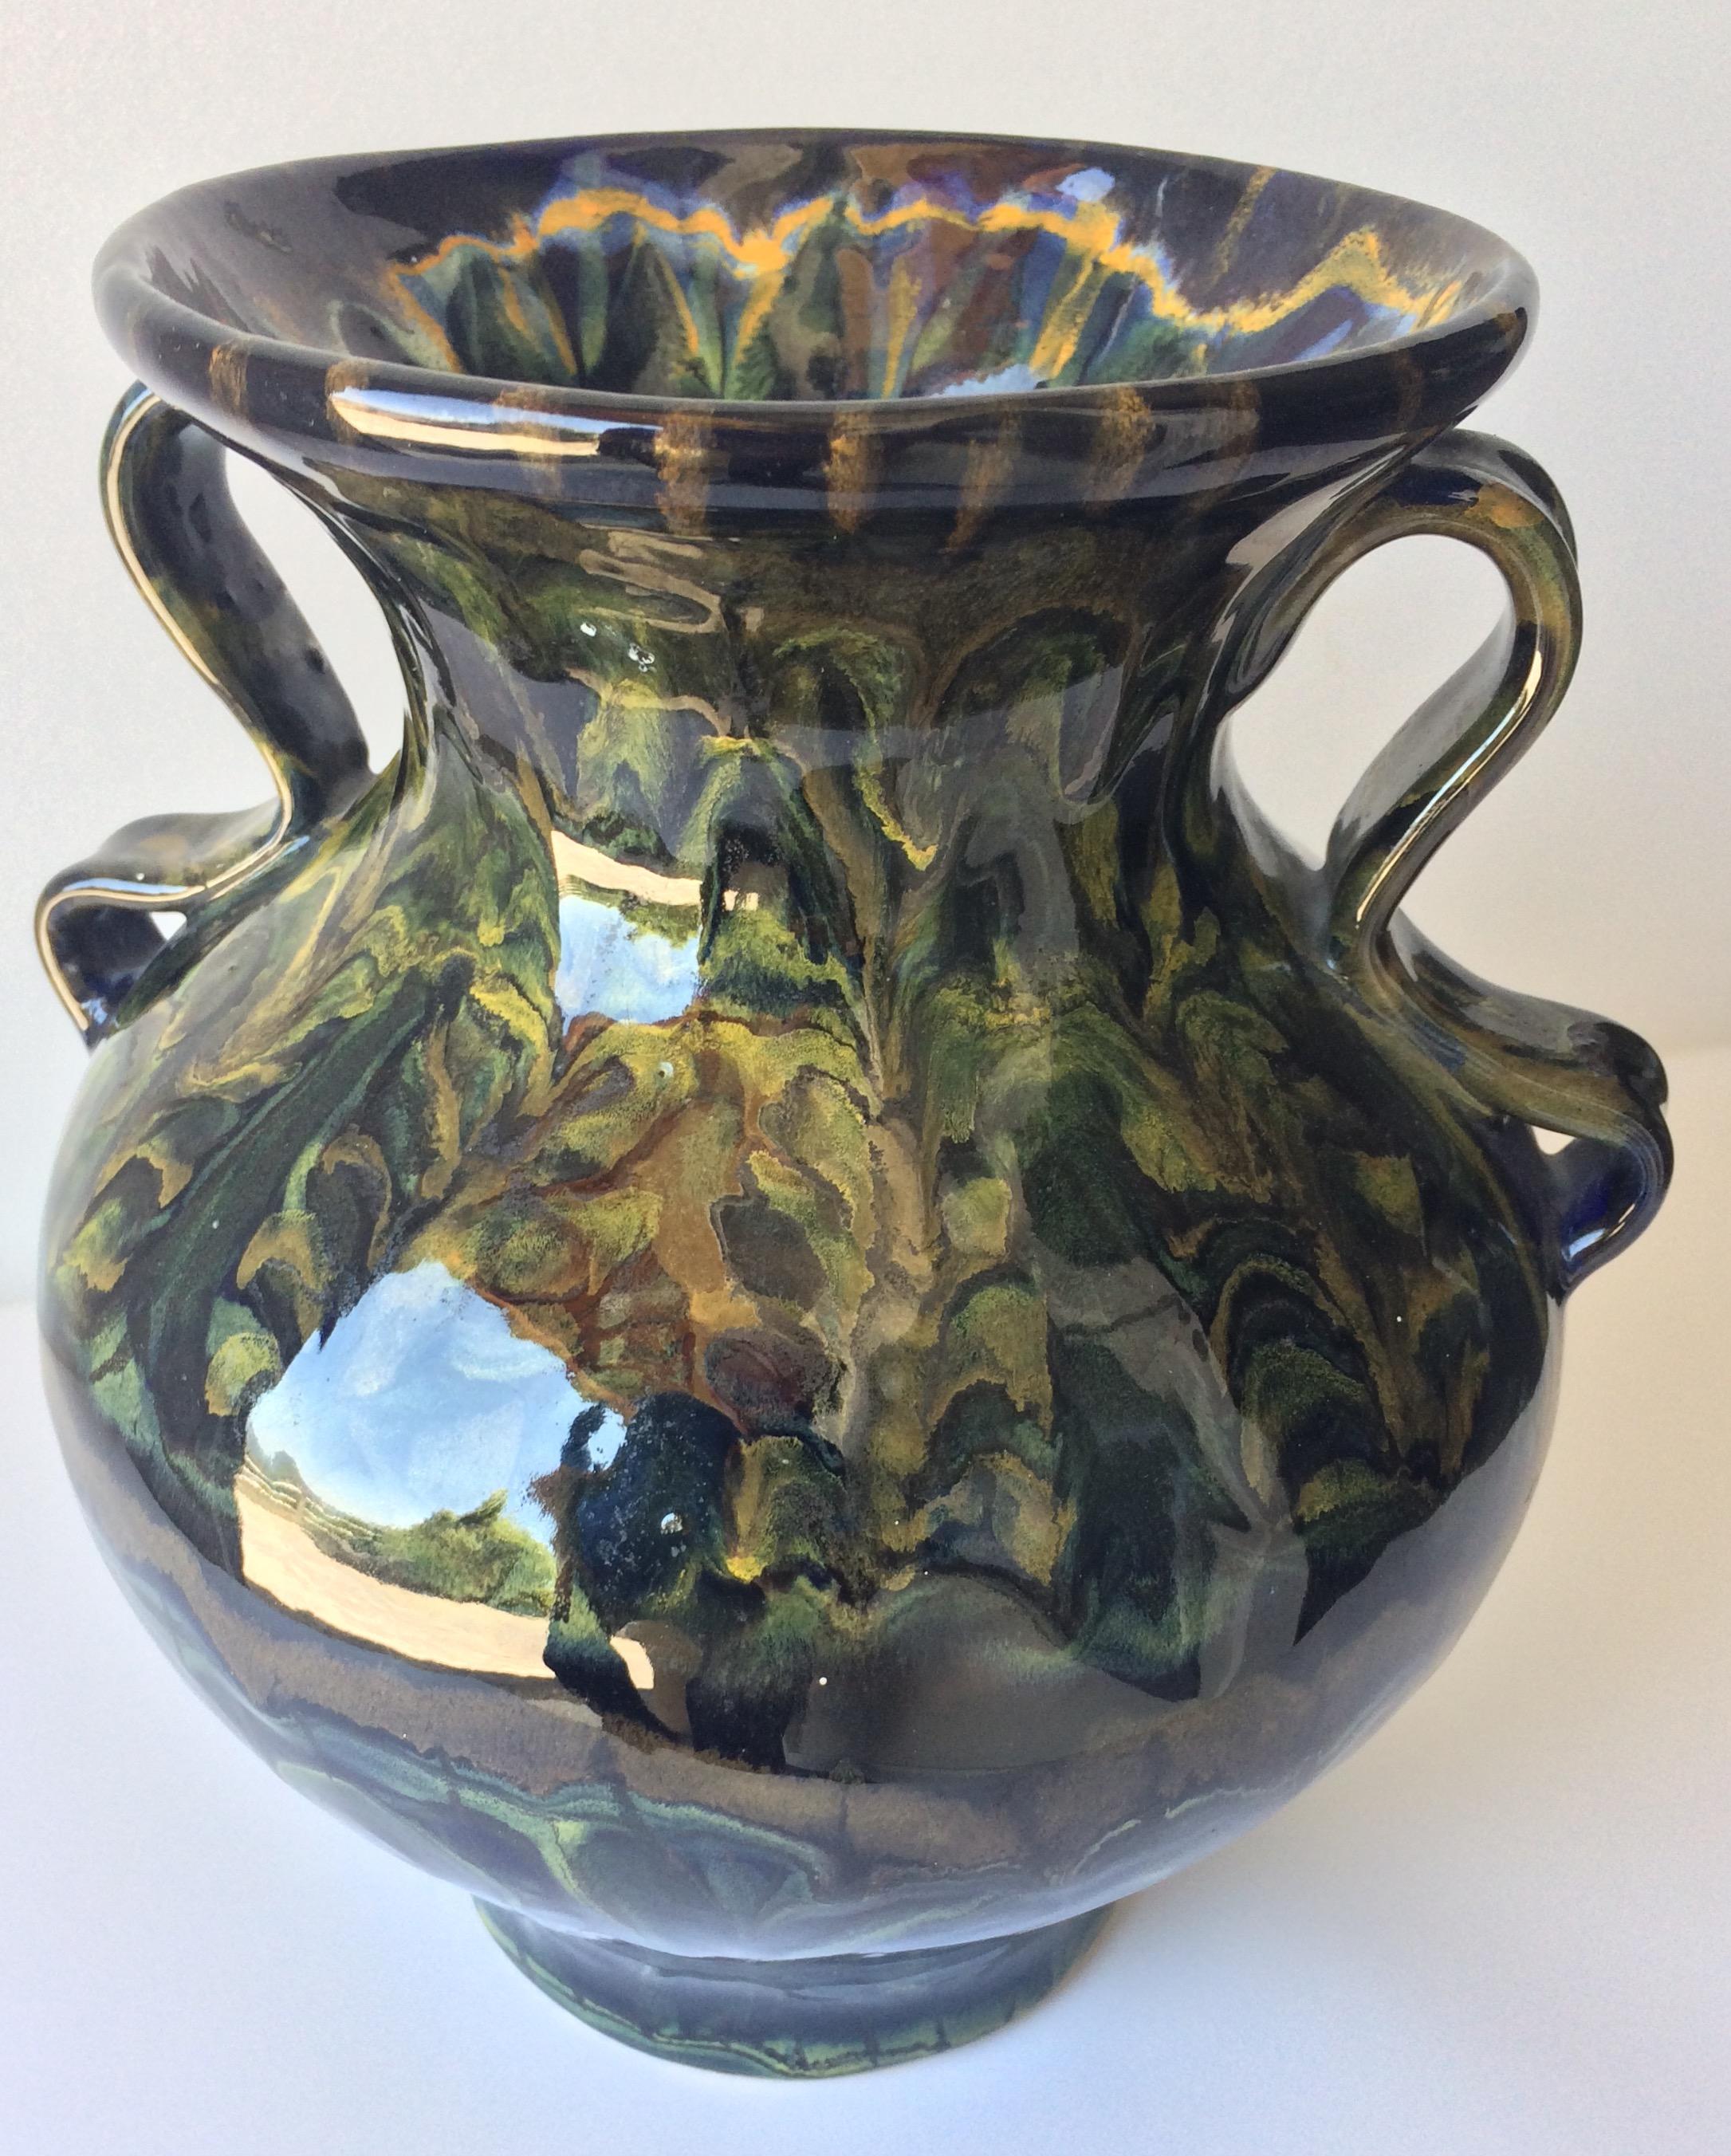 Dazzling glazed ceramic or stoneware vase. The underlying black, blue, orange, yellow and green colors and the swirling designs are truly eye catching. Made in Quimper, France by Keraluc Pottery Studio.

It can enhance any shelf, table, credenza or